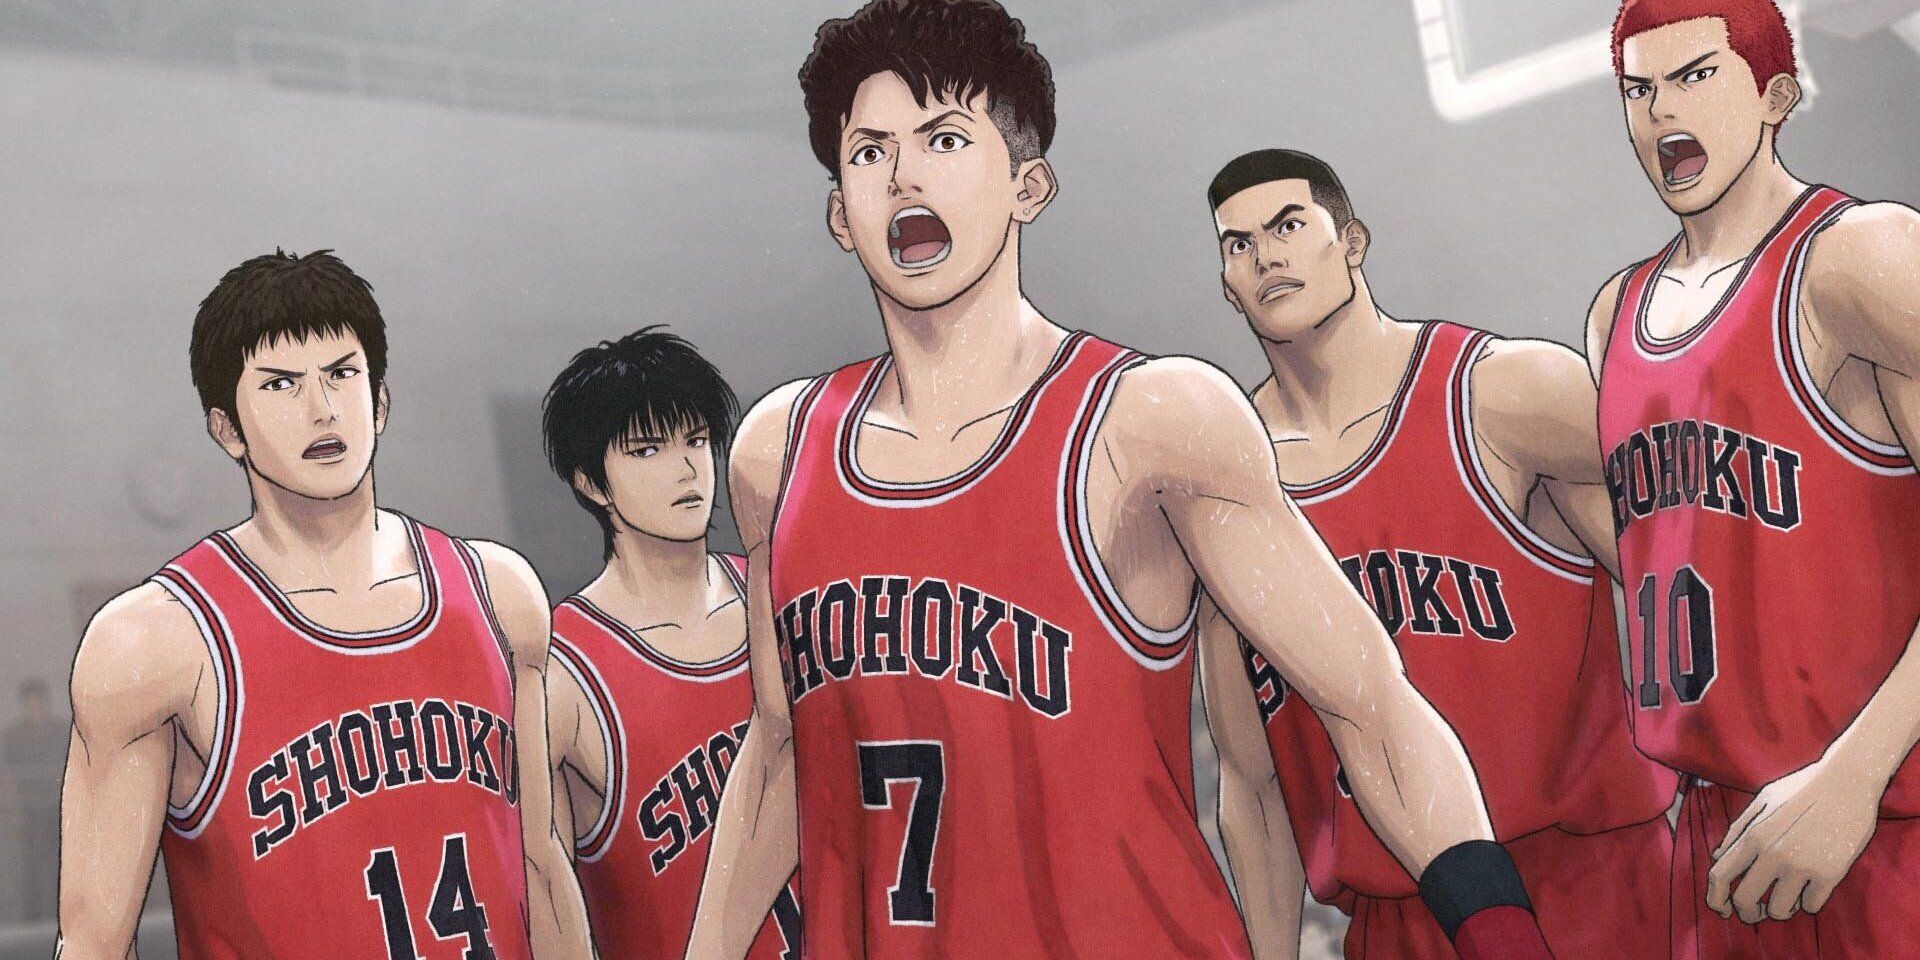 A still from The First Slam Dunk, featuring all 5 members of the Shohoku Basketball Team